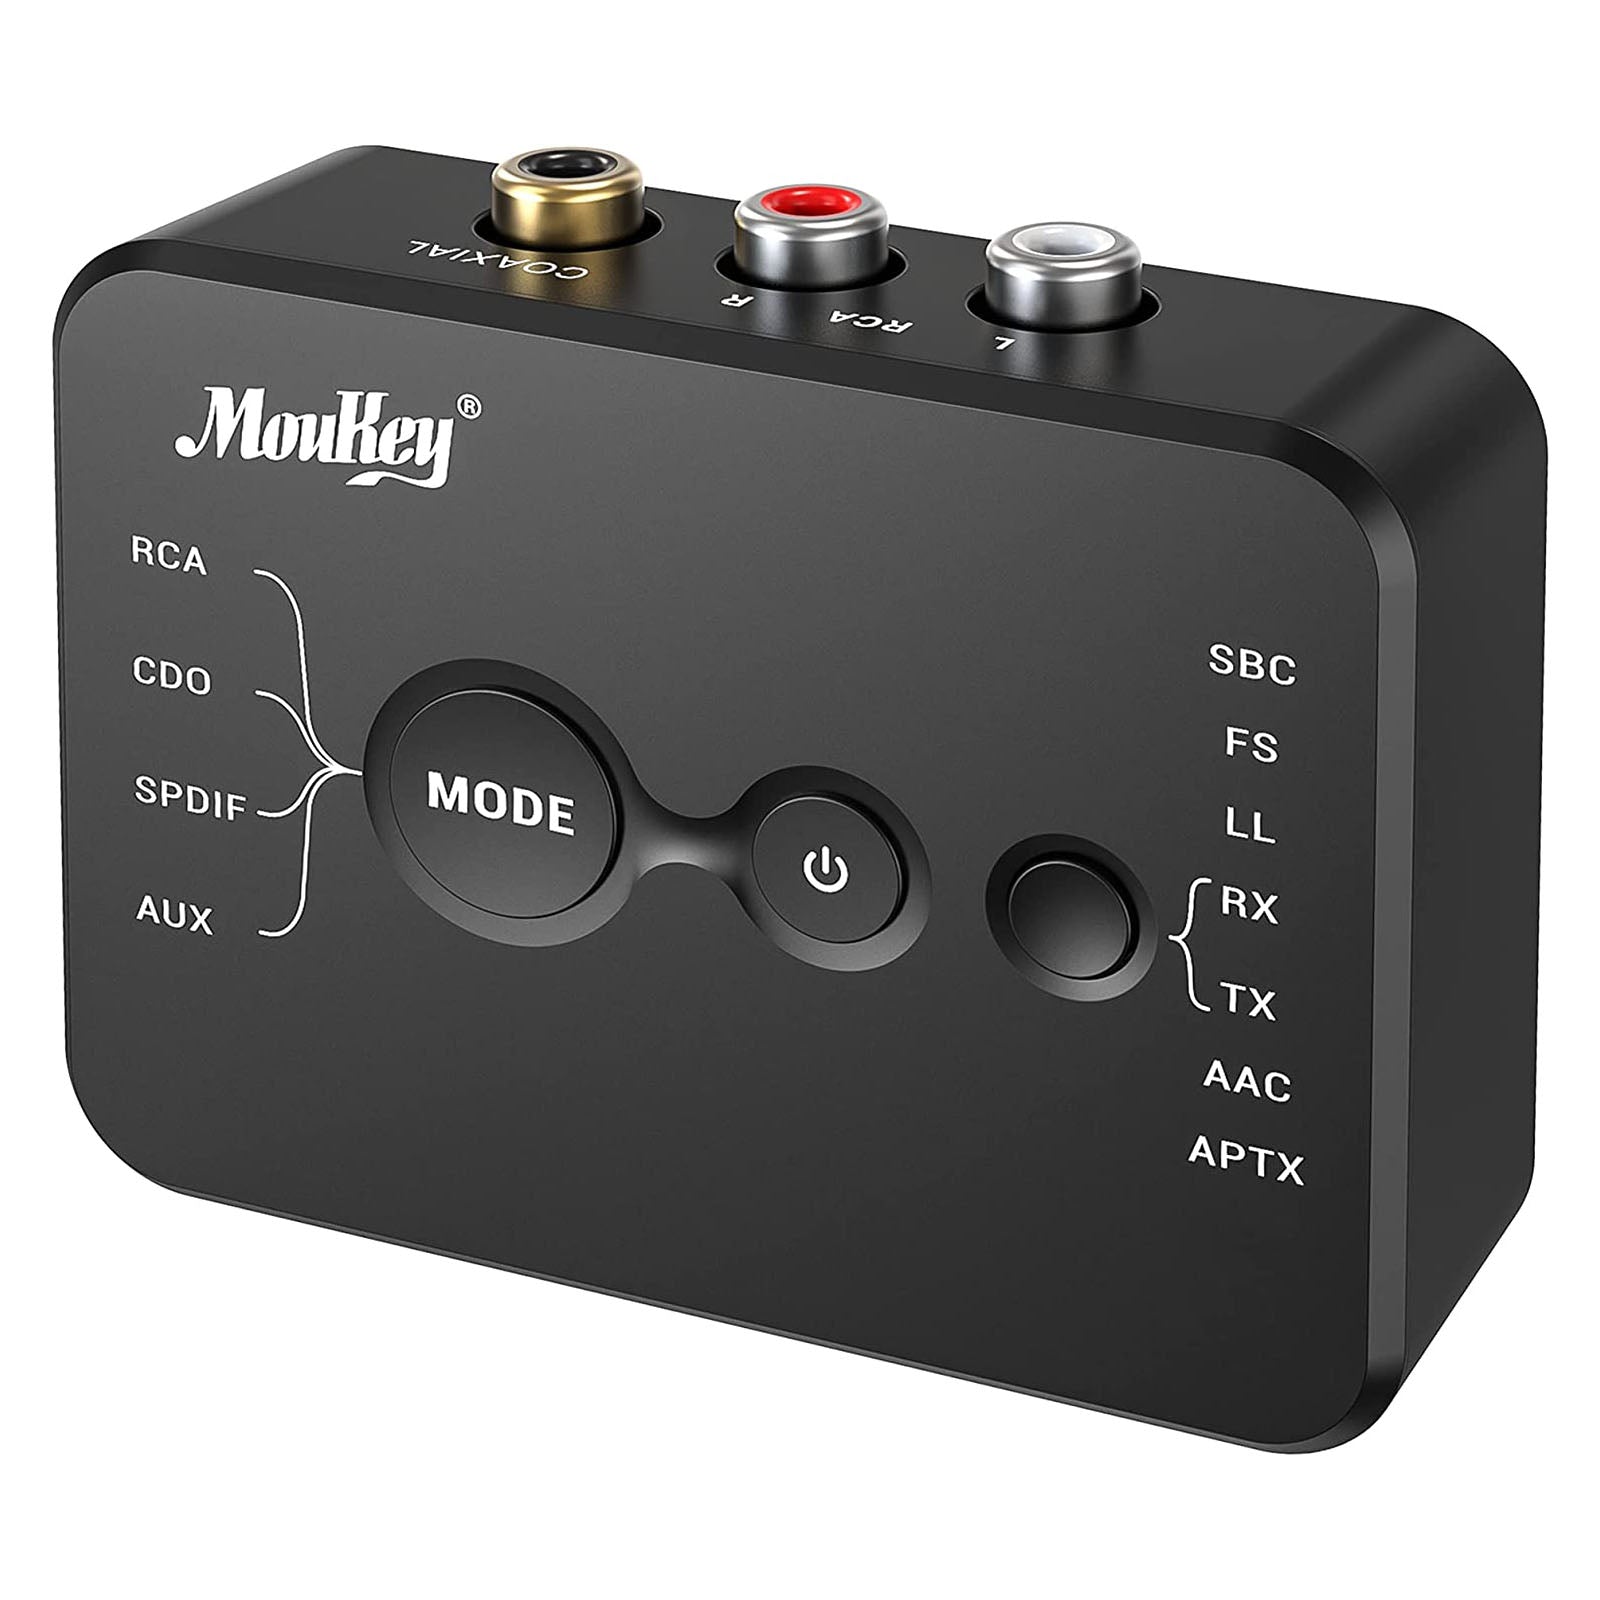 

Moukey MBRT1 Bluetooth 5.0 Transmitter and Receiver with 2 Modes